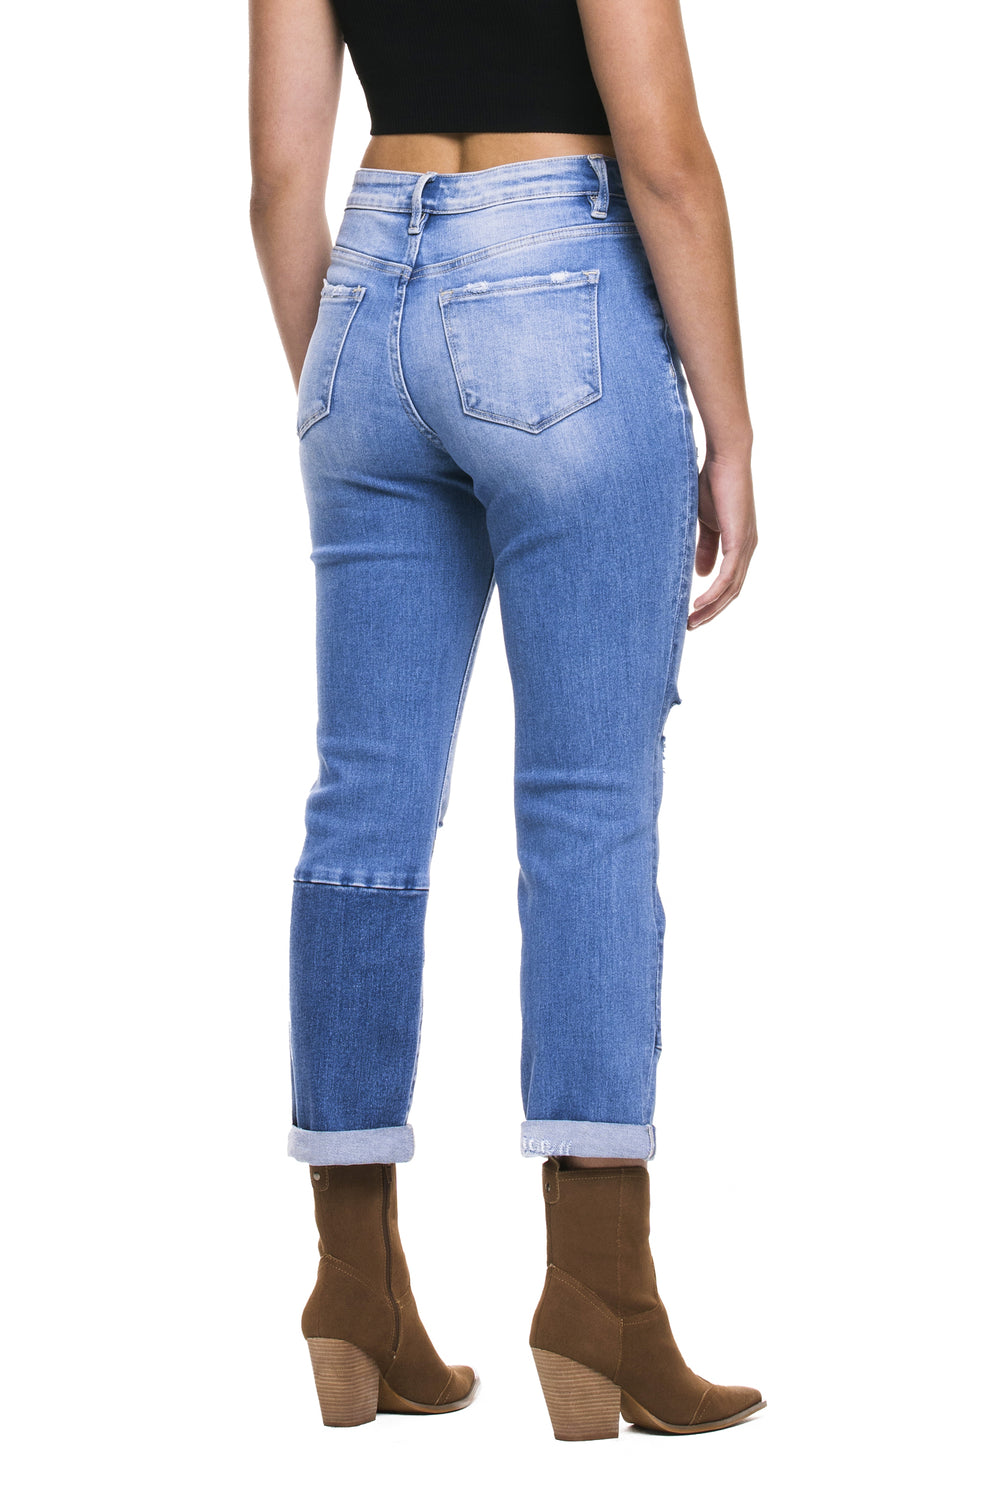 Diligent - Stretch Boyfriend Color Block Jeans with Rolled Cuff - Expressive Collective CO.